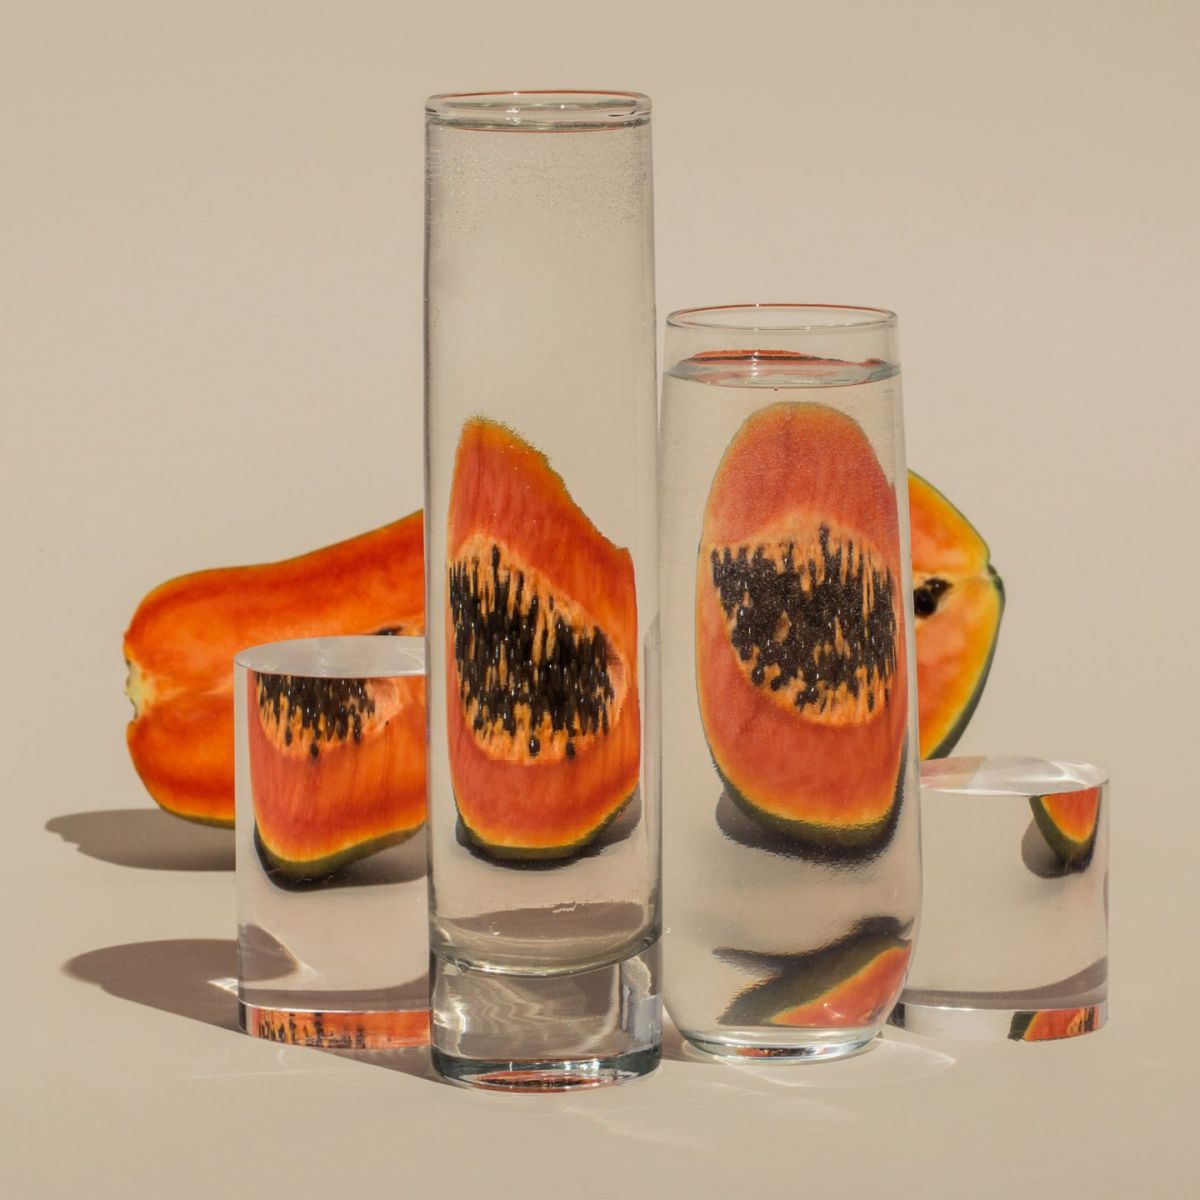 4 still life photography by suzanne saroff